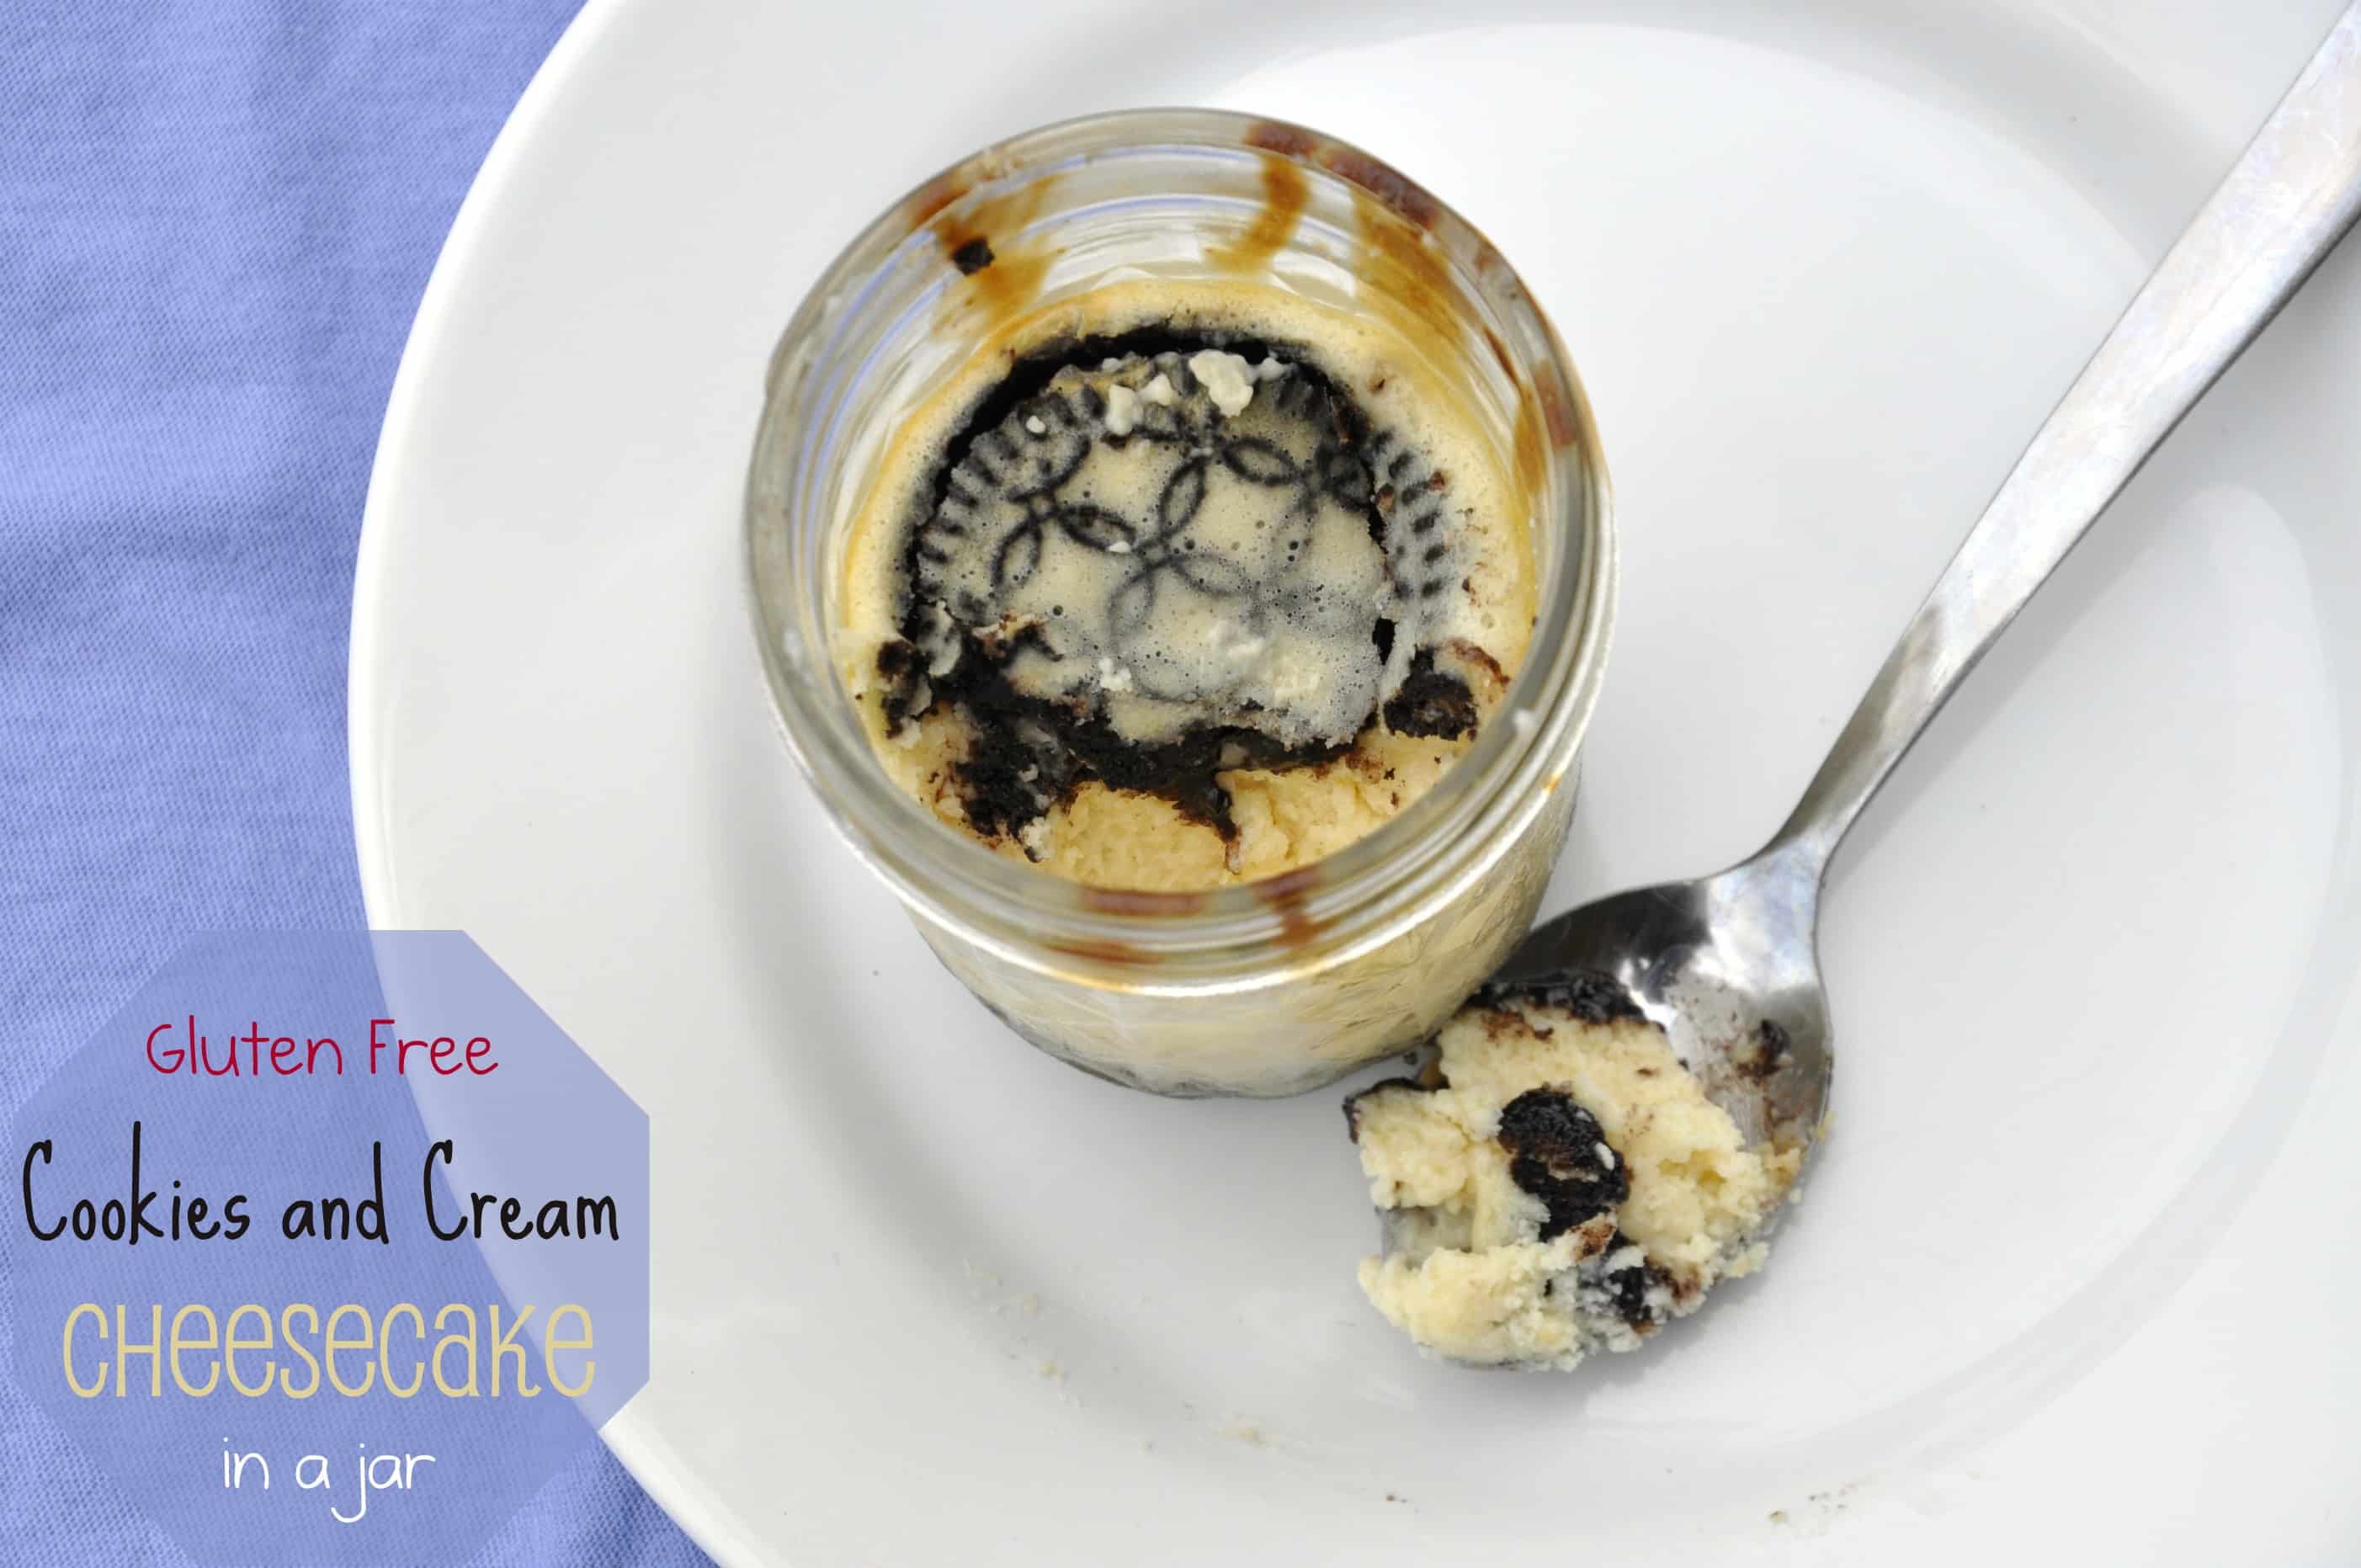 Gluten Free Cookies and Cream Cheesecake in a Jar